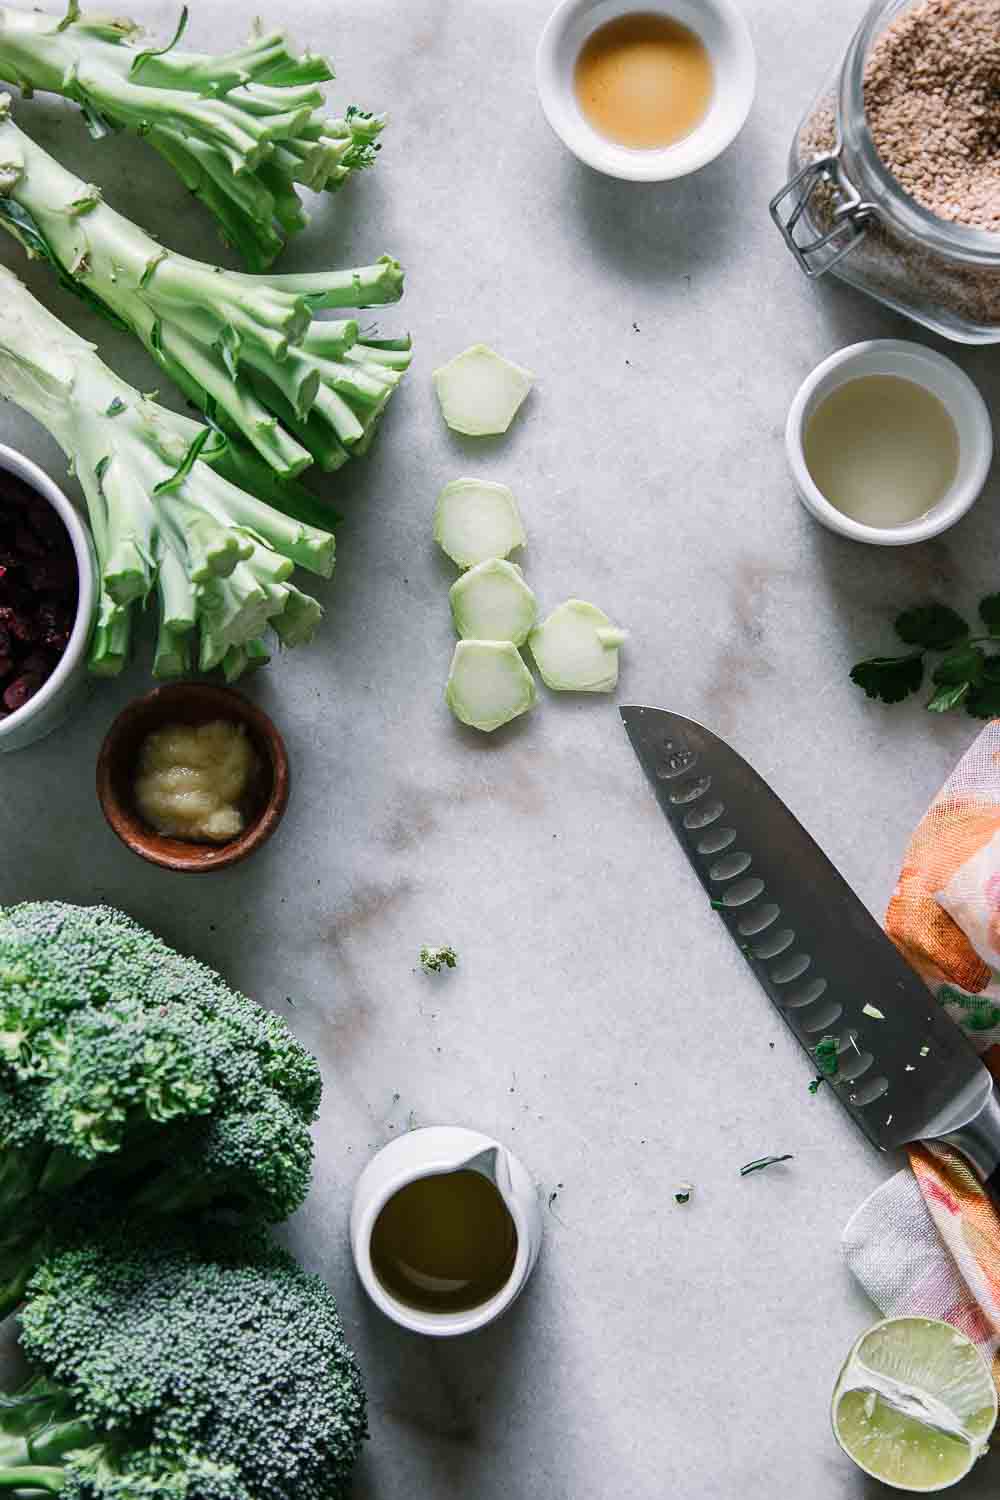 a cutting board with a knife, cut broccoli stalks, ginger, oil, and a lime